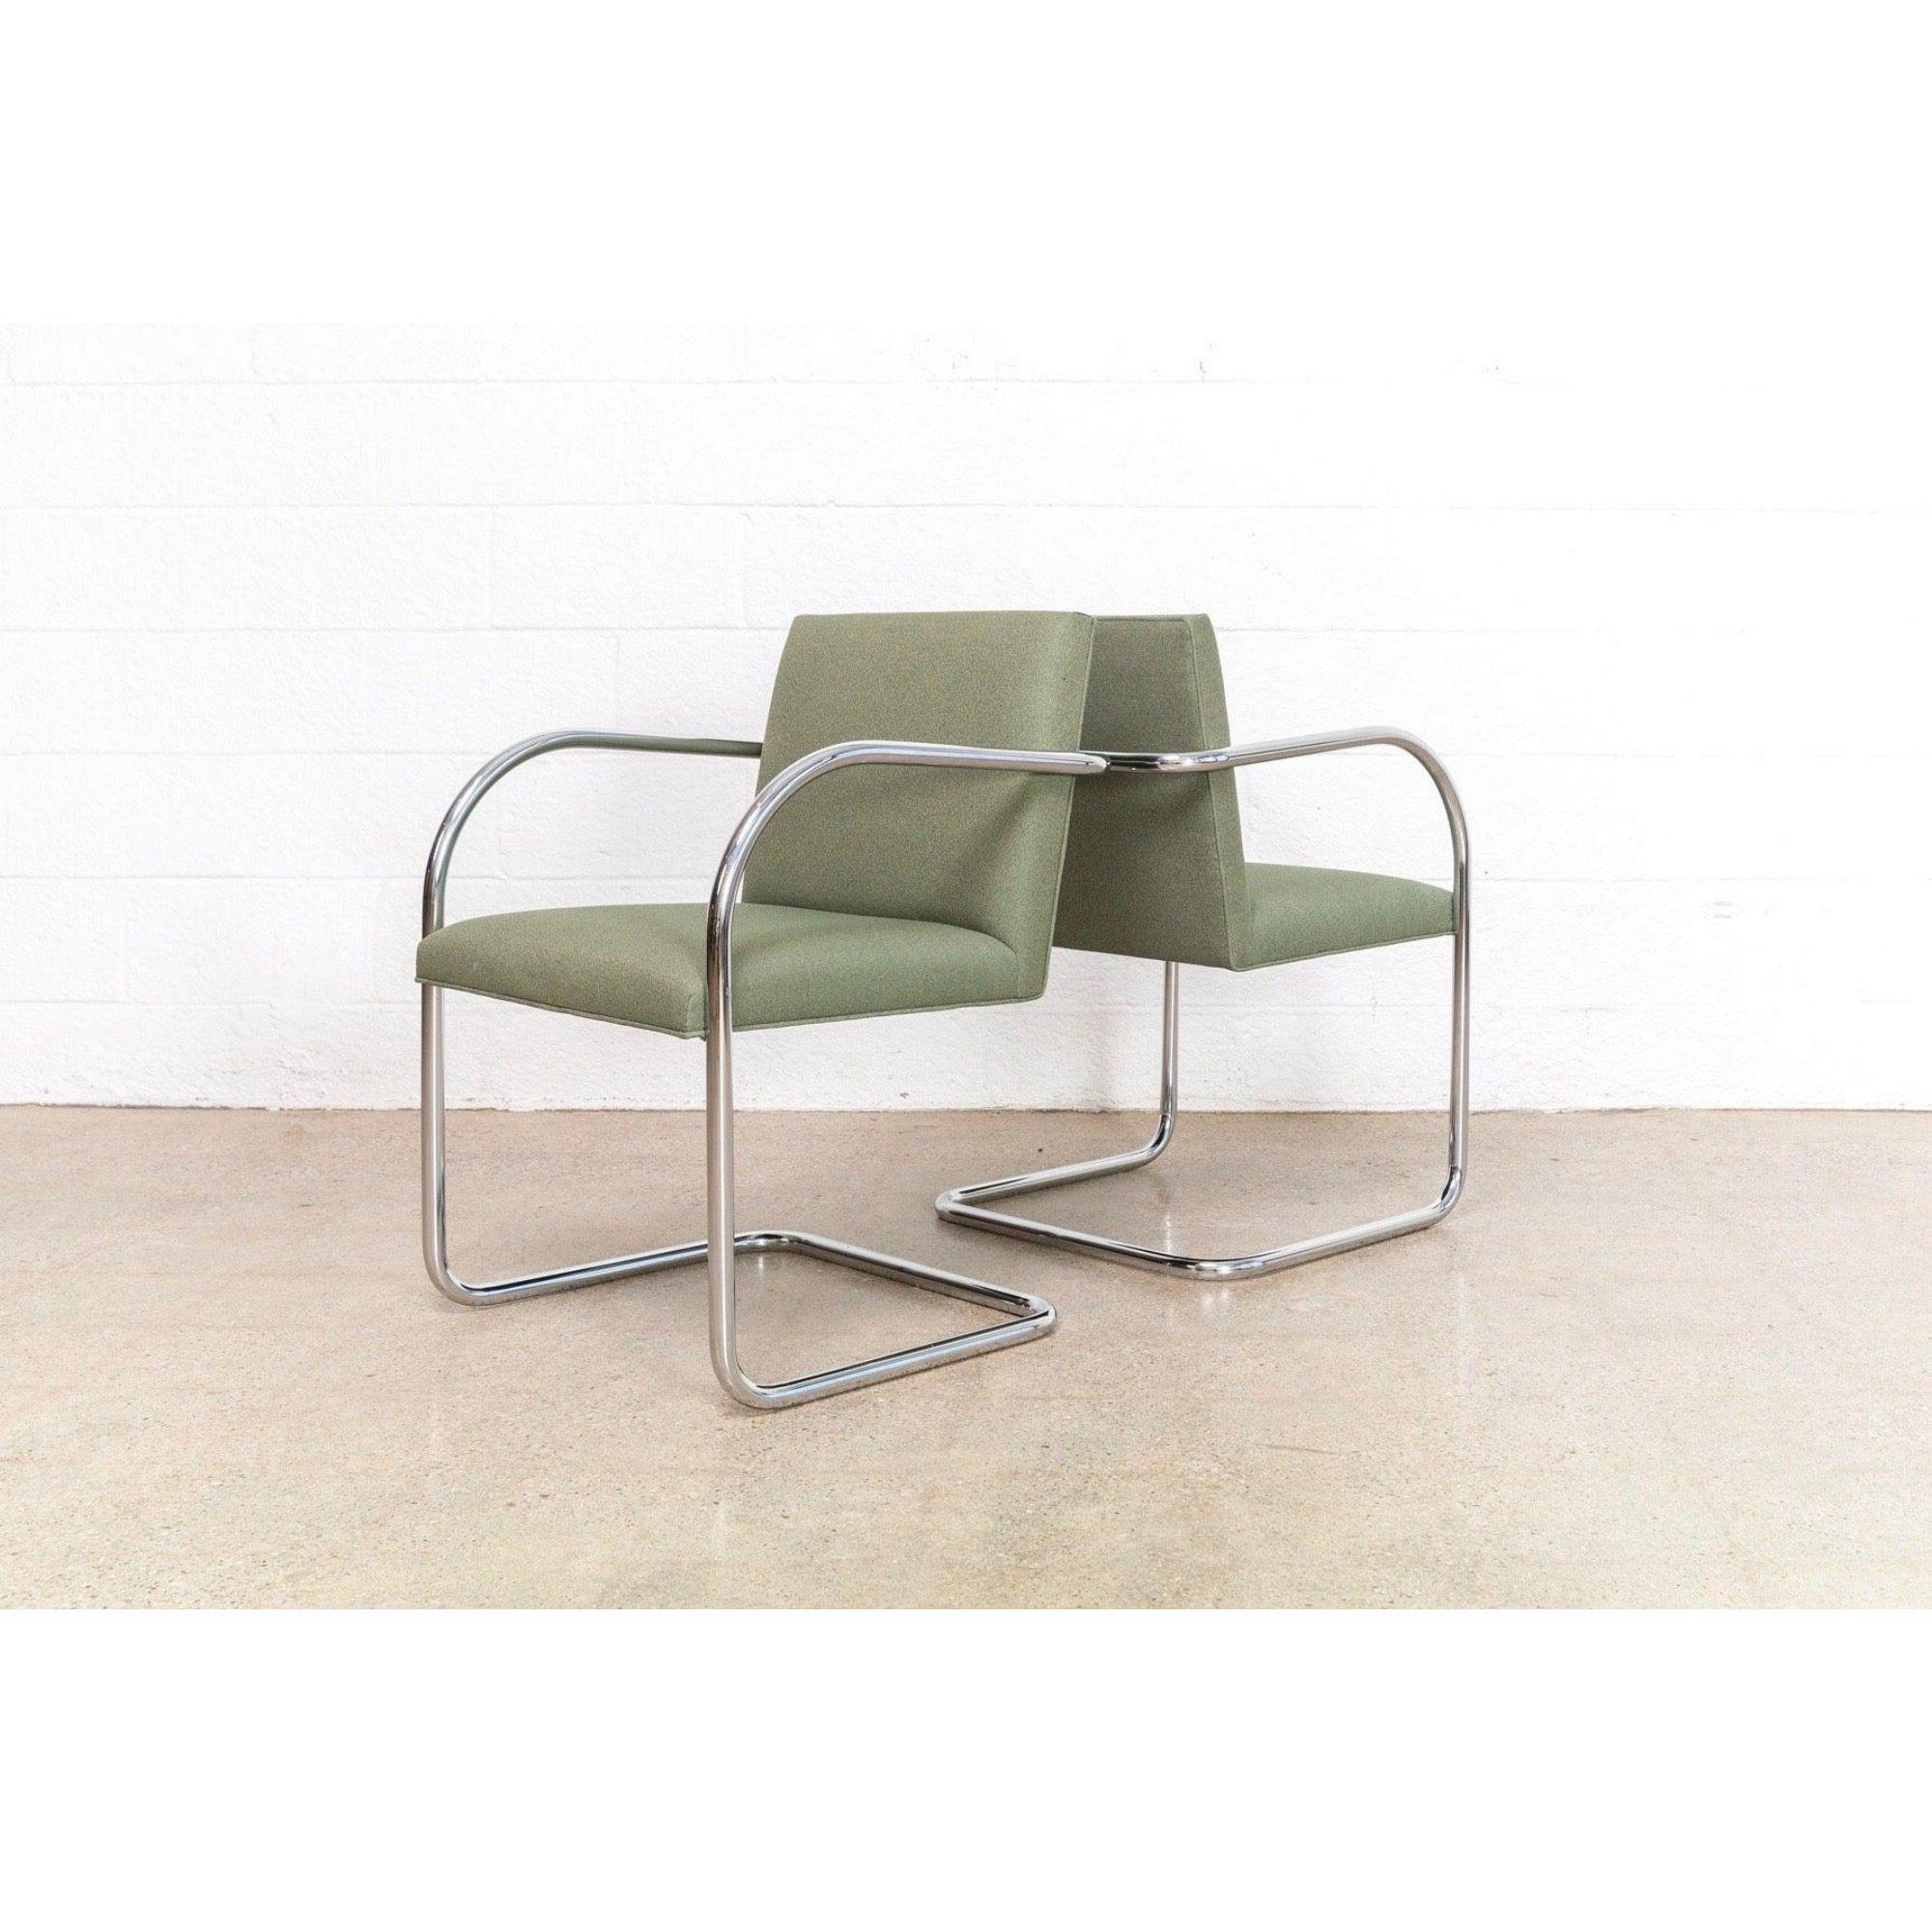 Bauhaus Green Brno Tubular Cantilever Dining Chairs by Mies Van Der Rohe 1